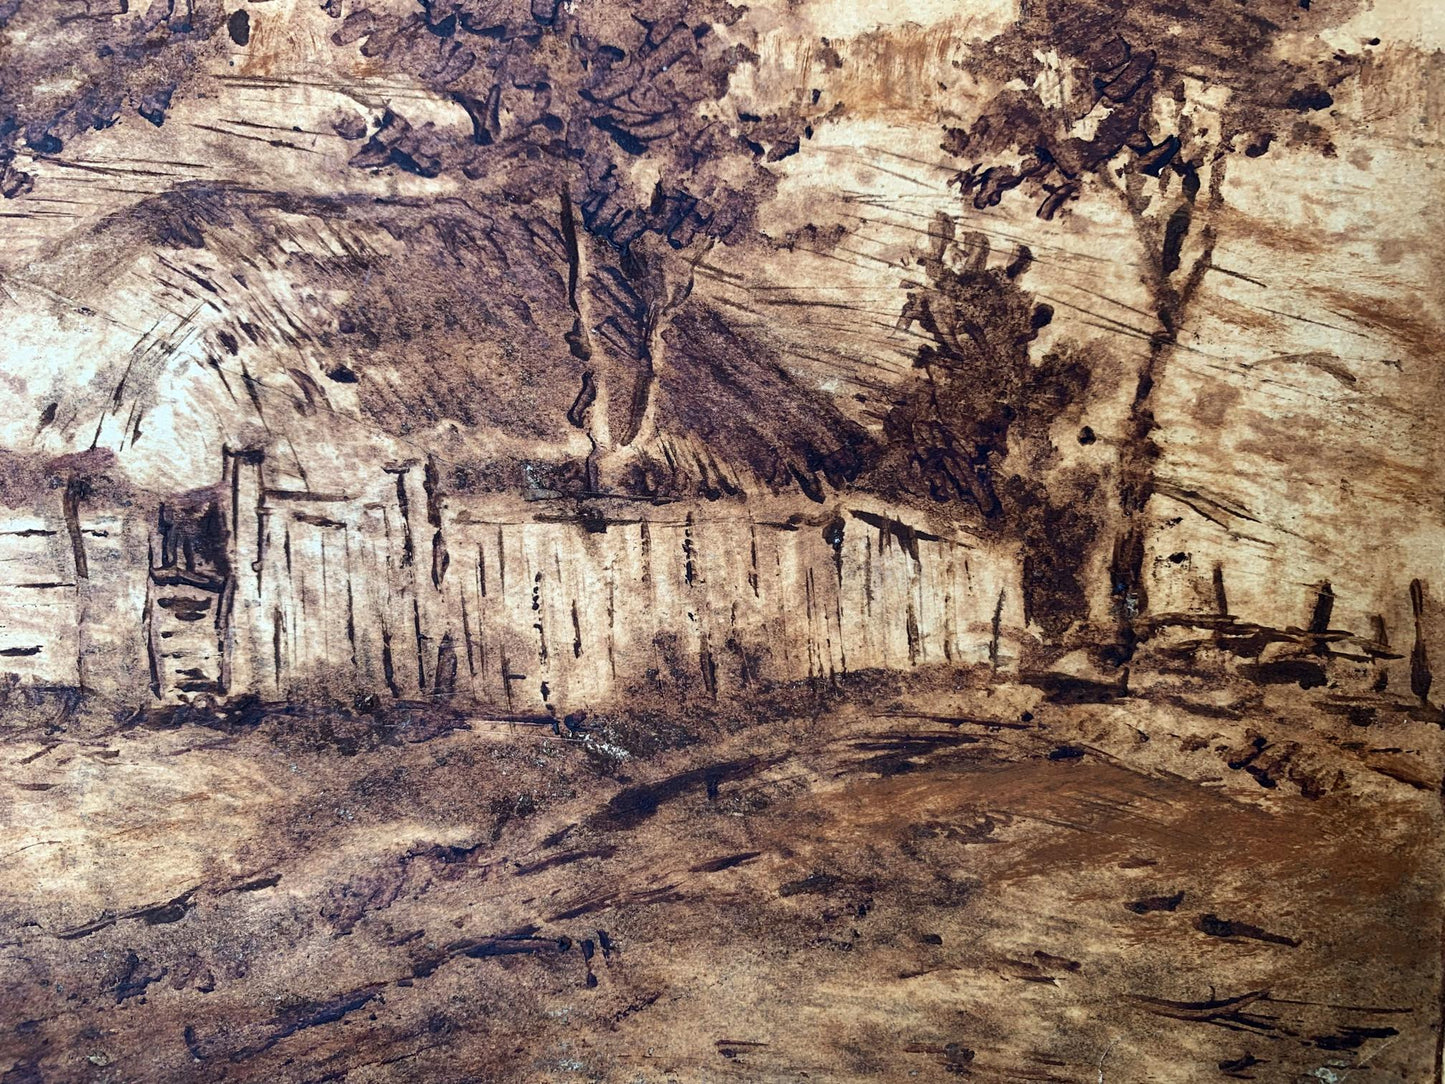 Sepia painting A lonely house in the forest A. G. Cherkas